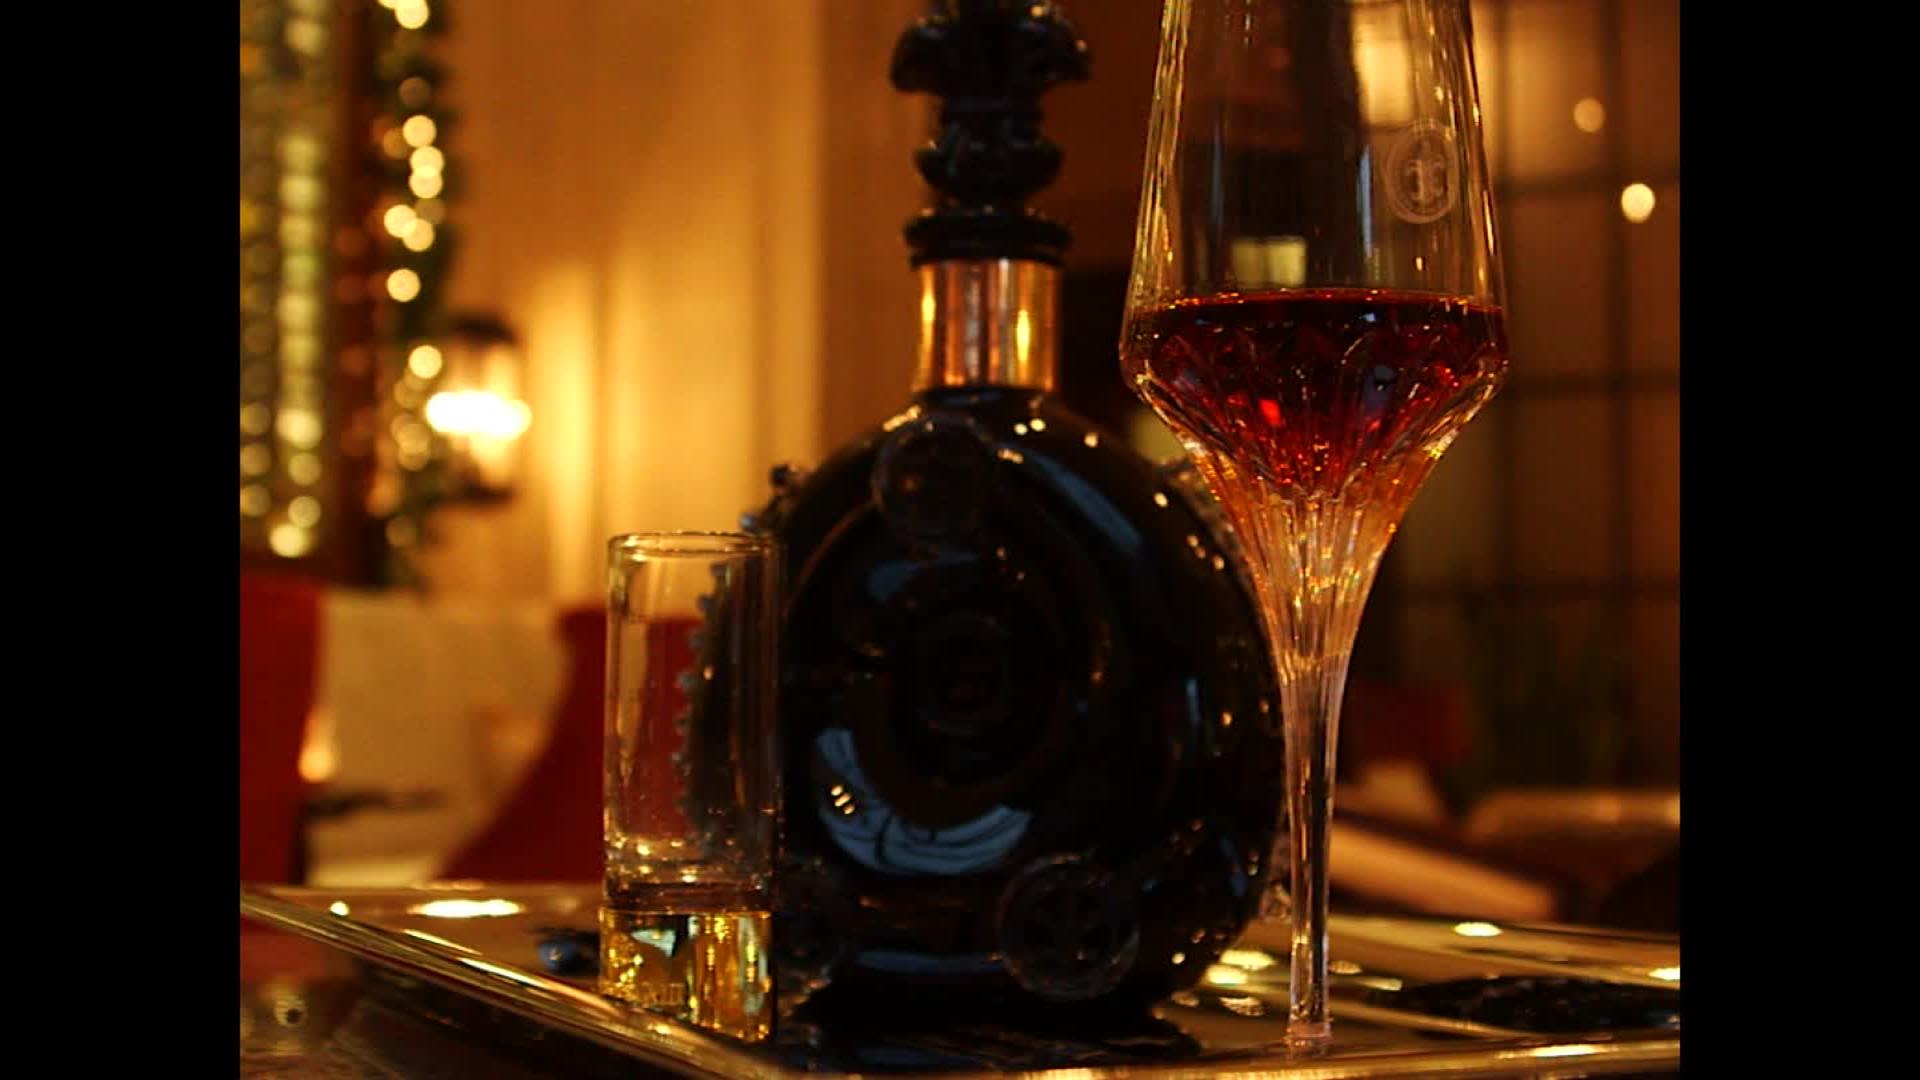 French fancy: Louis XIII Rare Cask is a cognac like no other